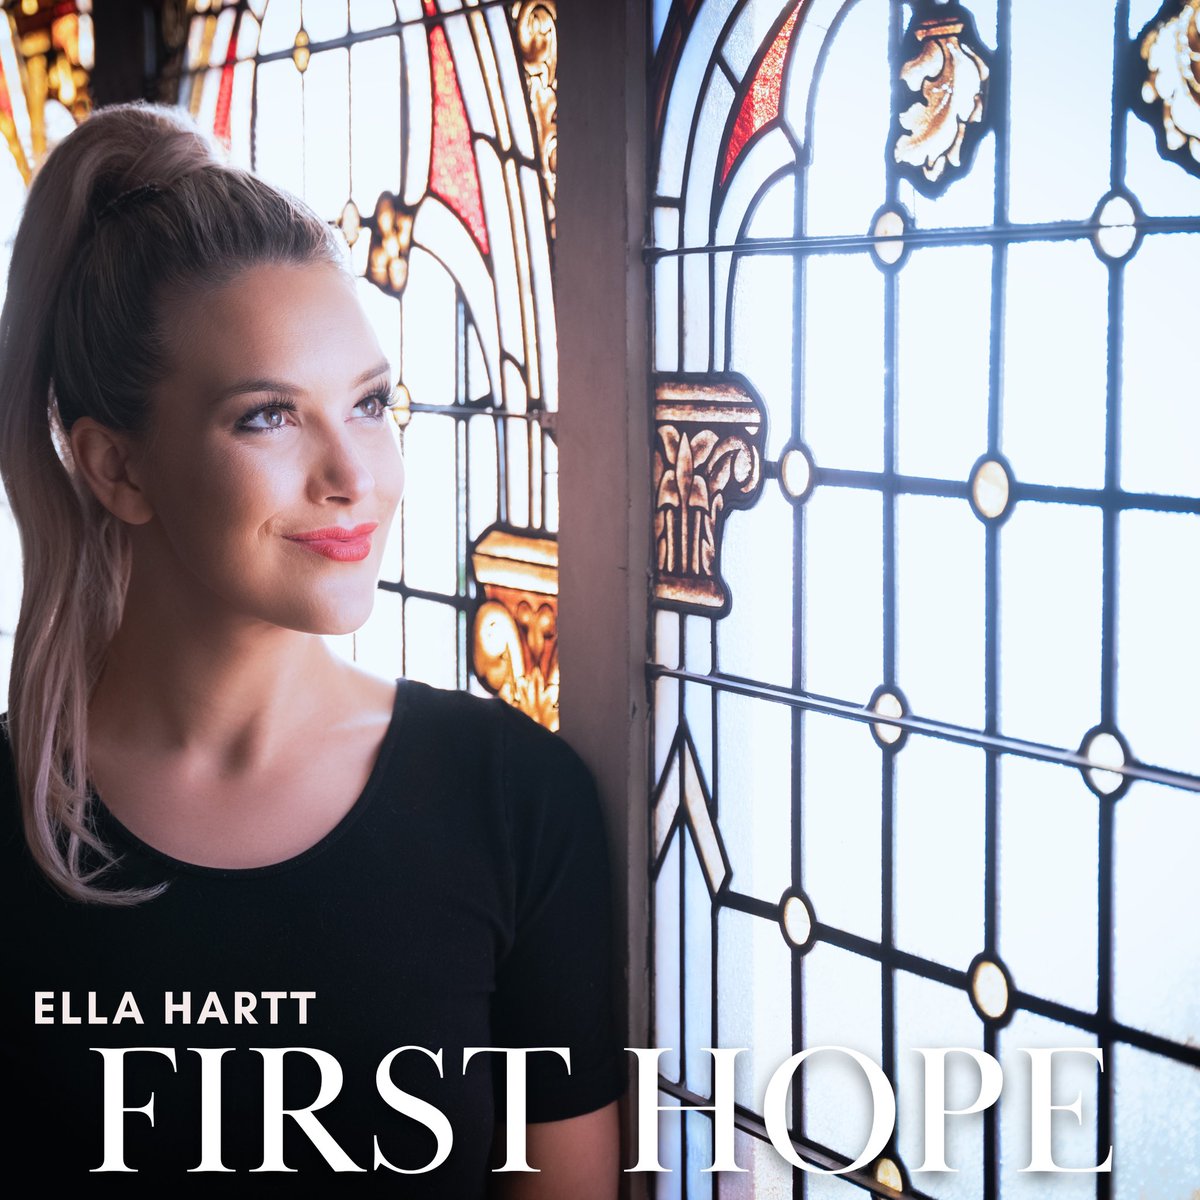 No matter what life brings, there is always hope ❤️

Check out my new song First Hope 🎶
ffm.to/firsthope

#NewMusic2023 #newsong #indieartist #ellahartt #leftbehind #sundayvibes